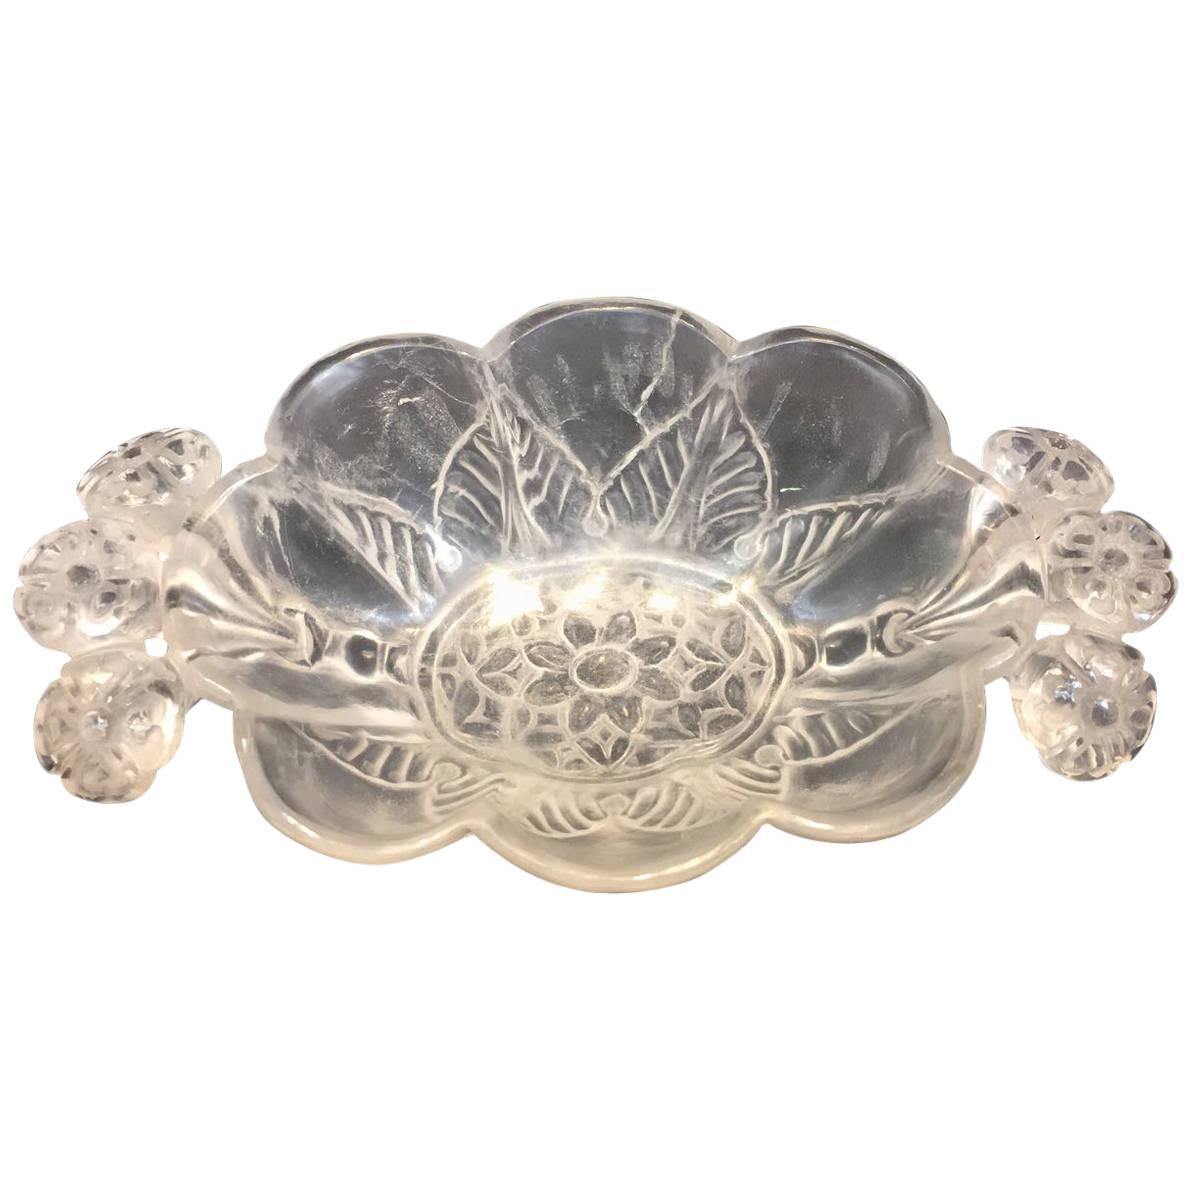 19th Century Rock Crystal, Mughal Period For Sale